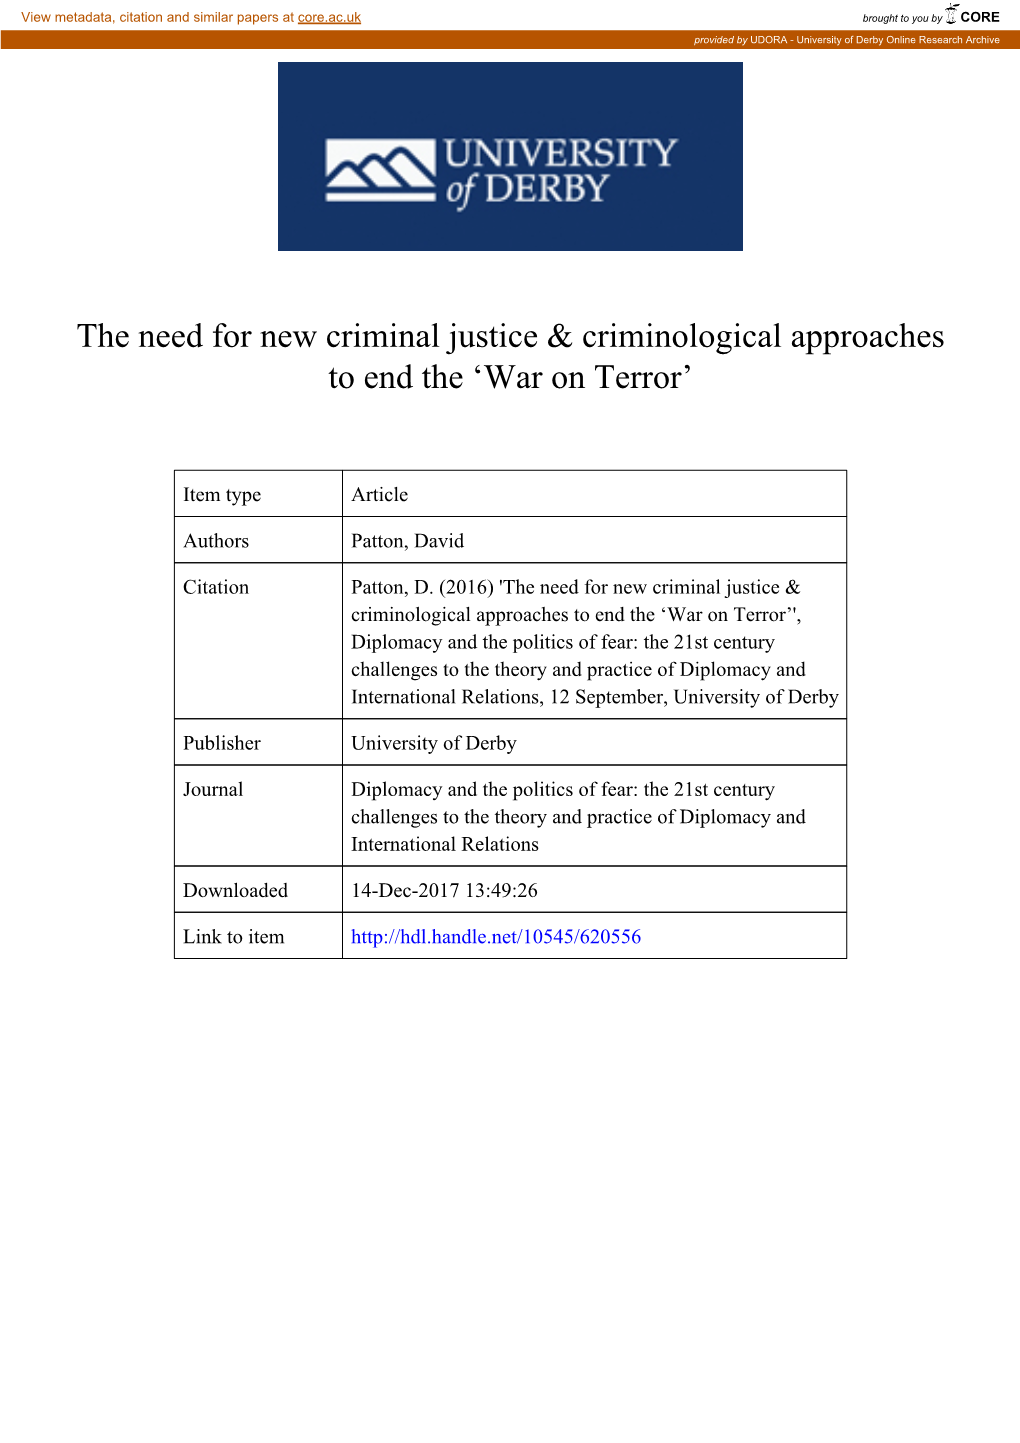 The Need for New Criminal Justice & Criminological Approaches